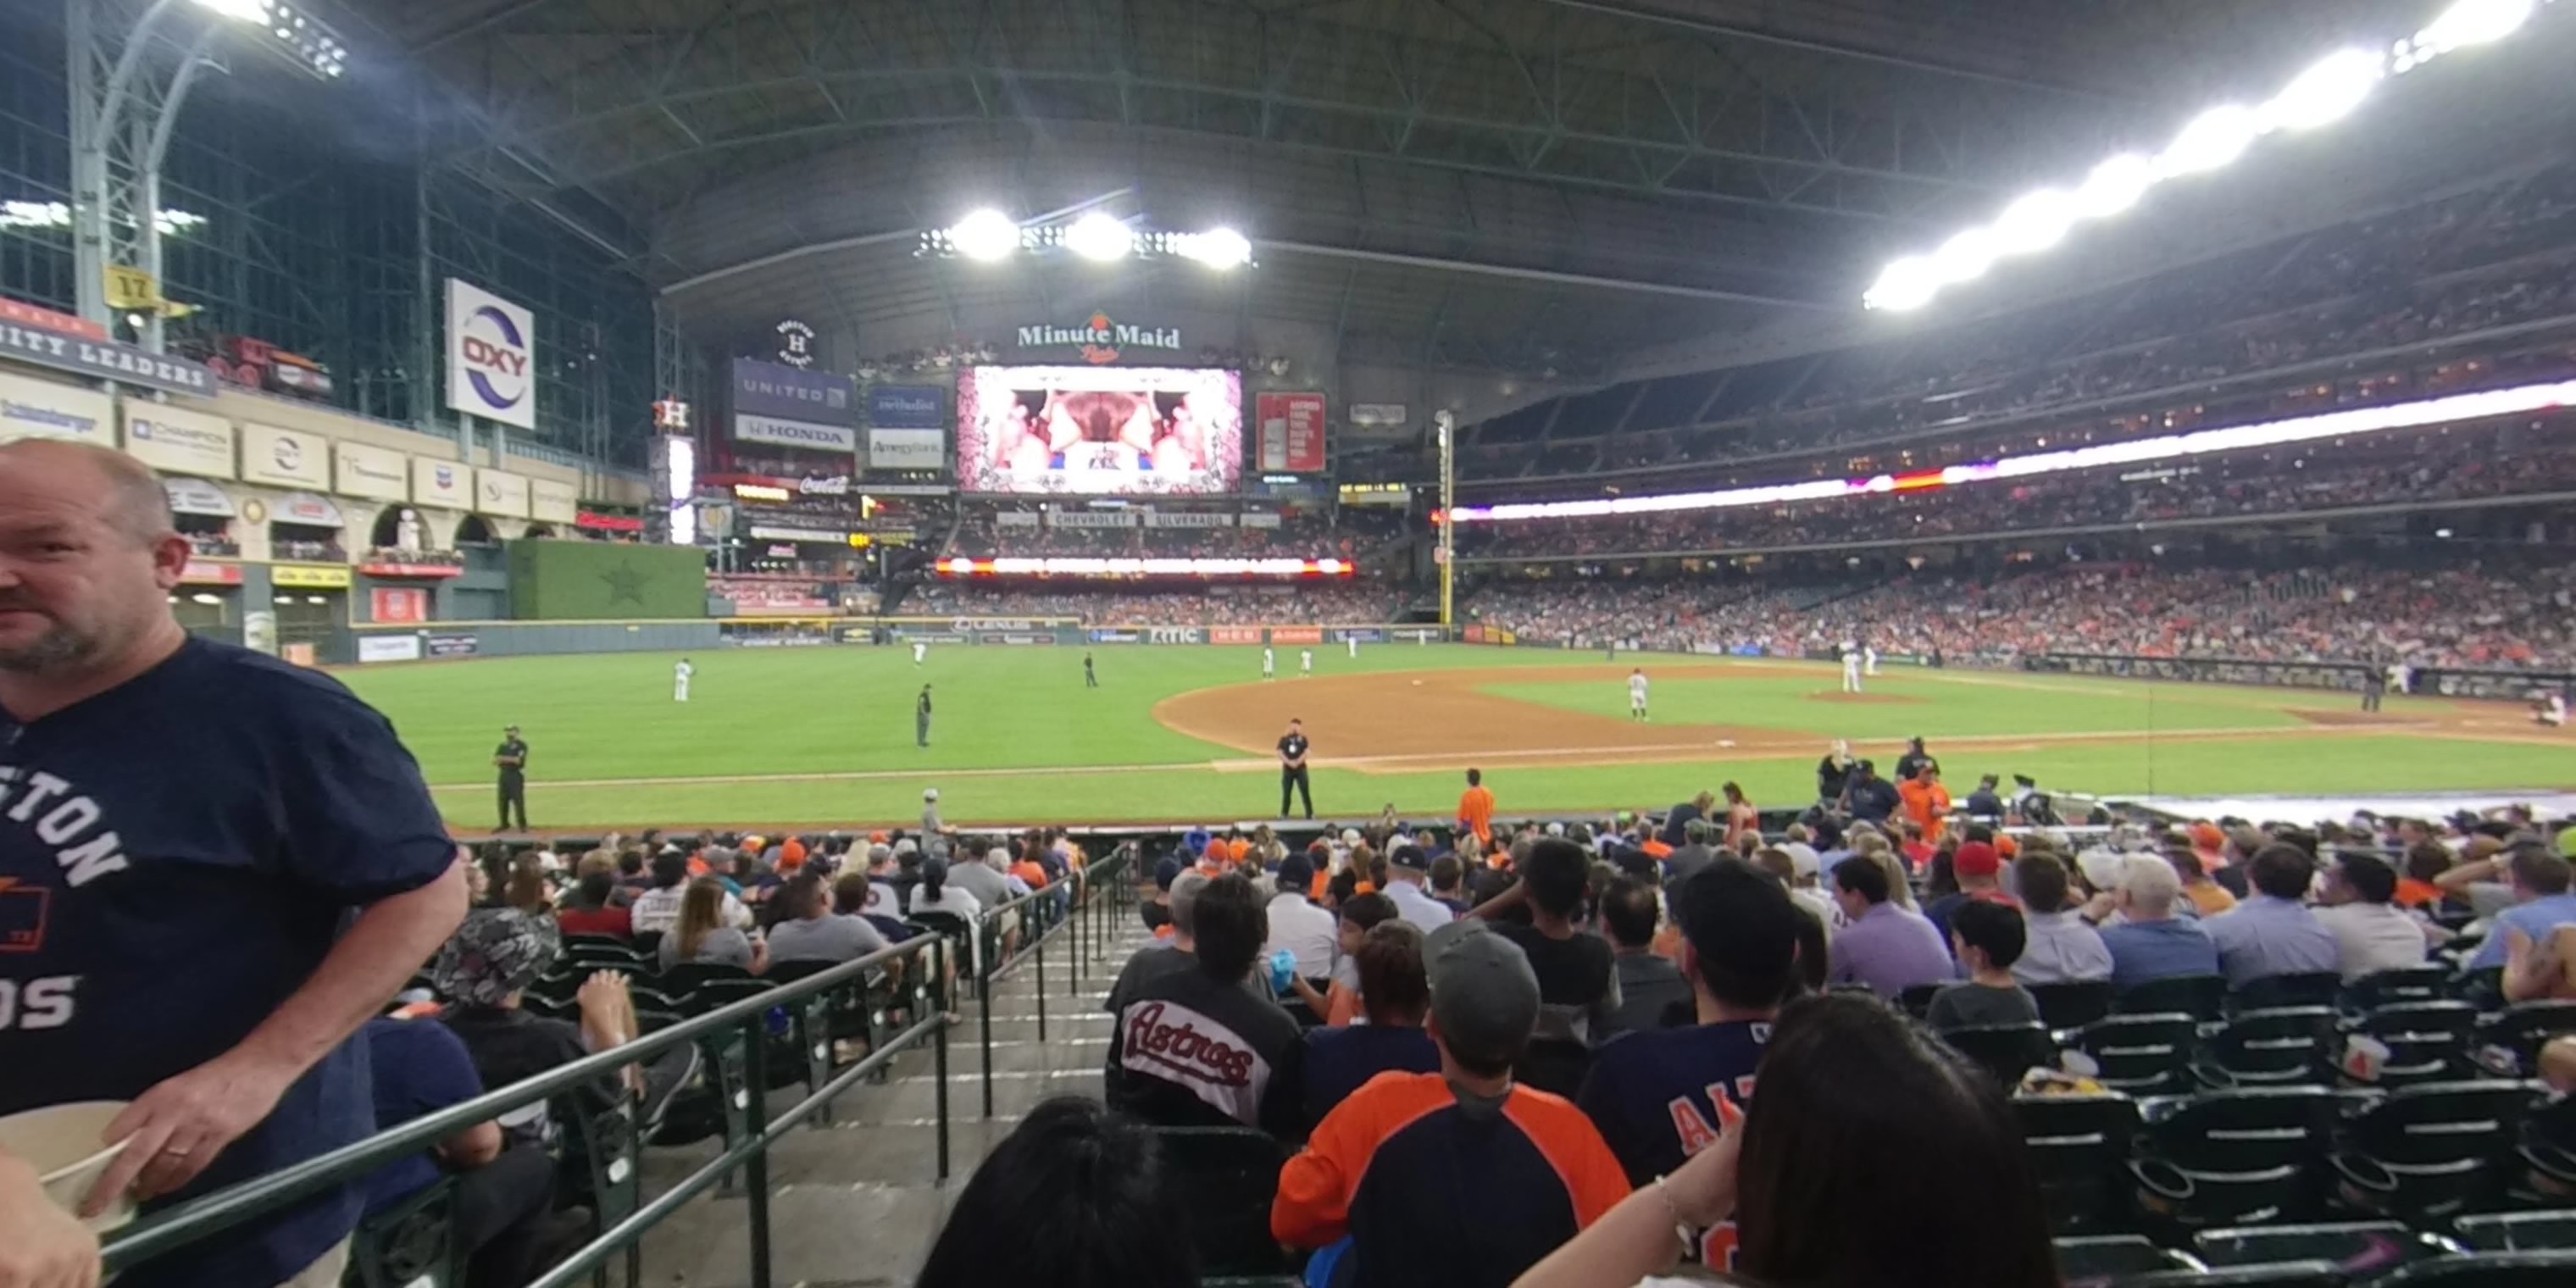 Review of Minute Maid Park